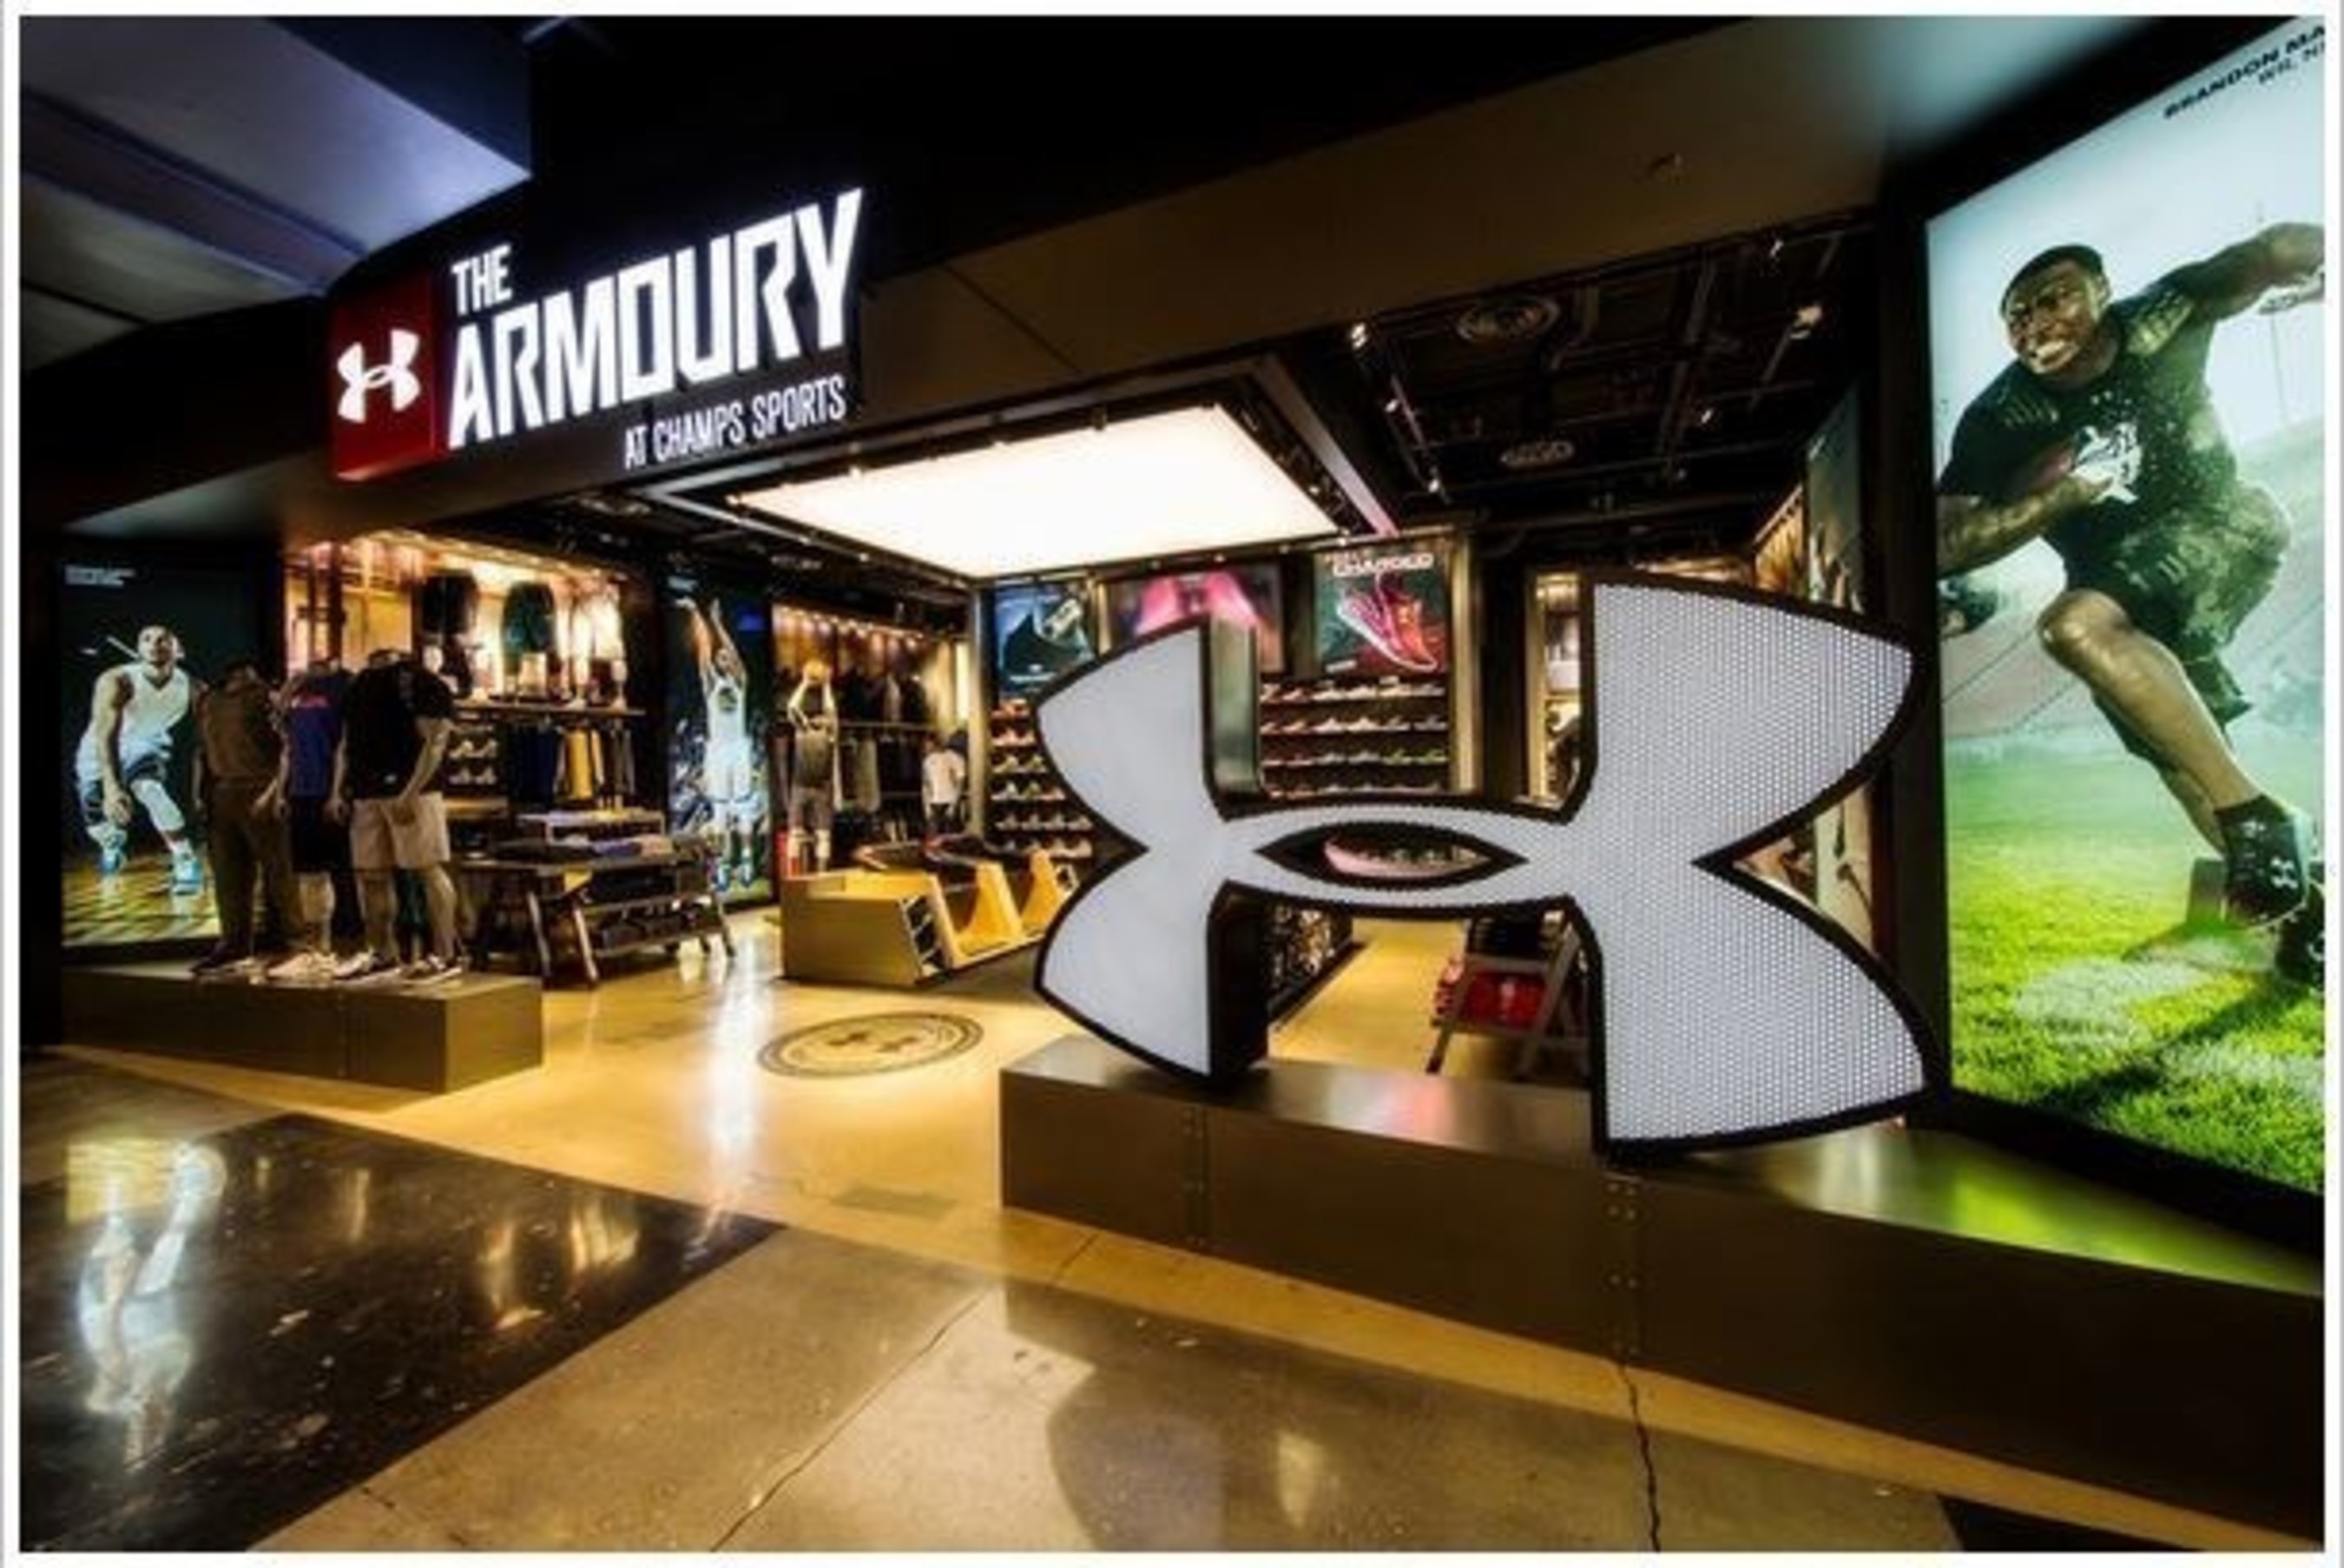 The ARMOURY at Champs Sports at The Mall in Columbia (Md.)